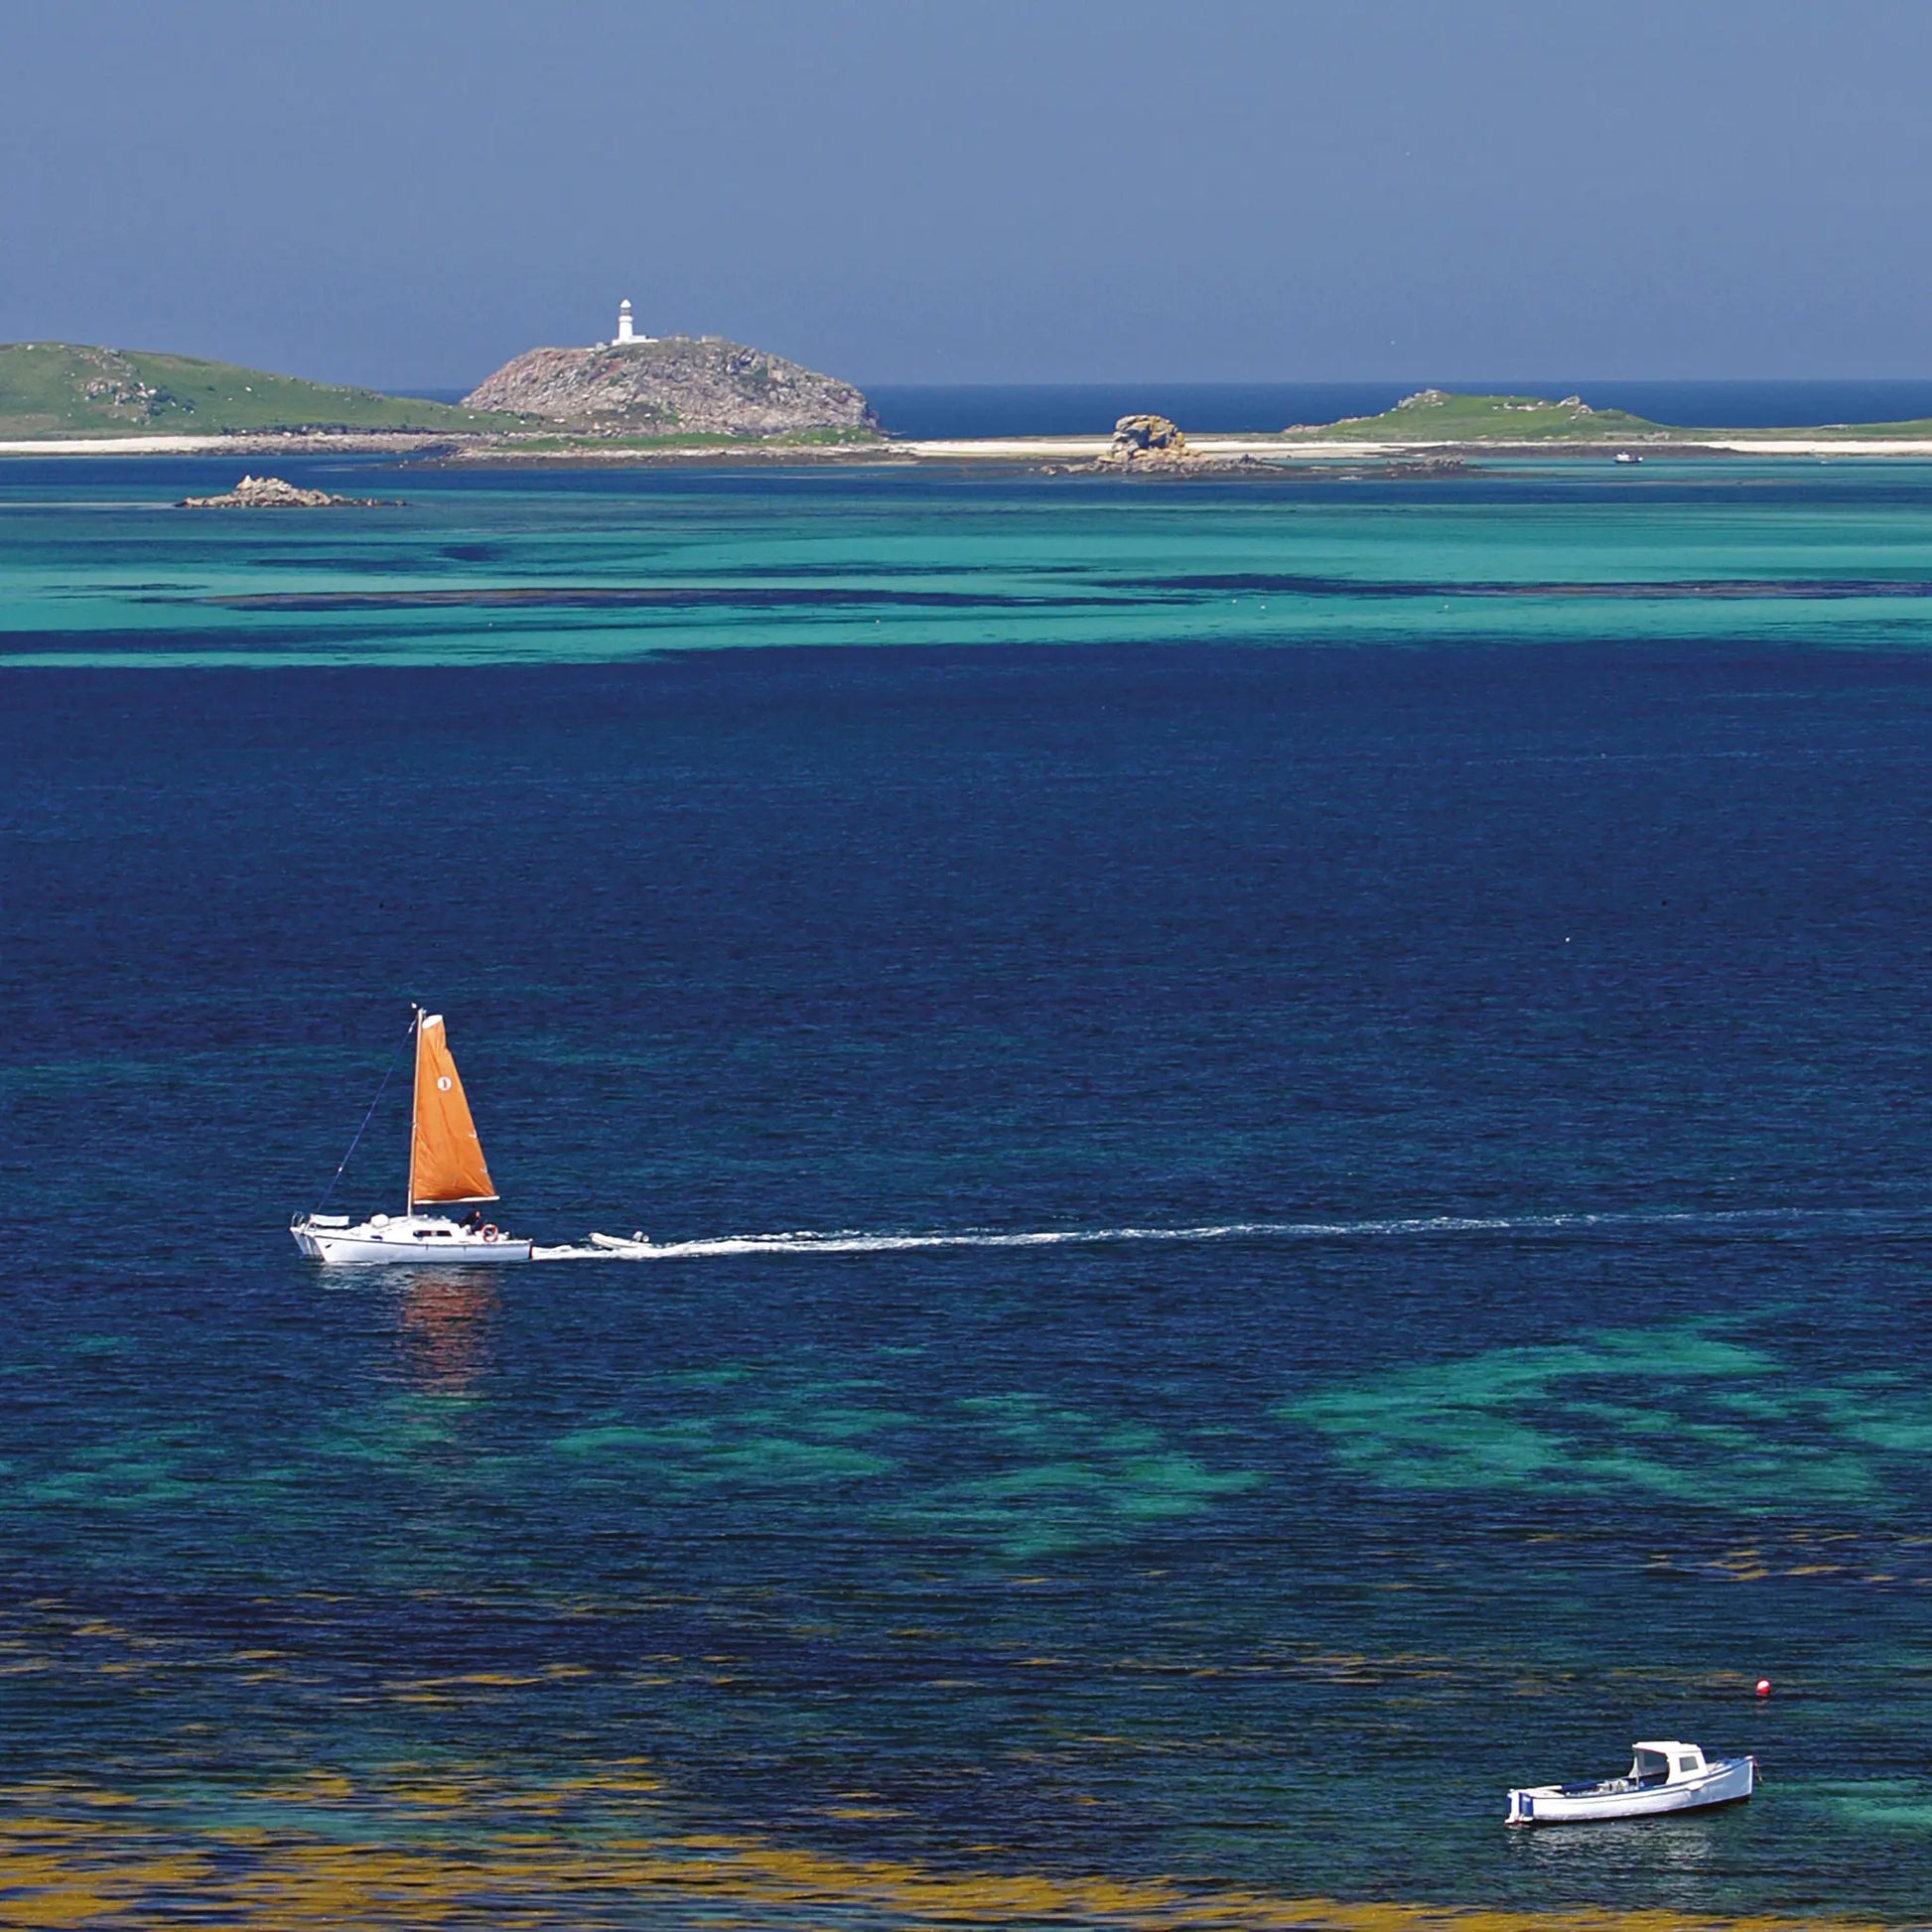 Cornish greetings card image of blue and aquamarine waters in front of Round Island Light, a yacht in the foreground with orange sail